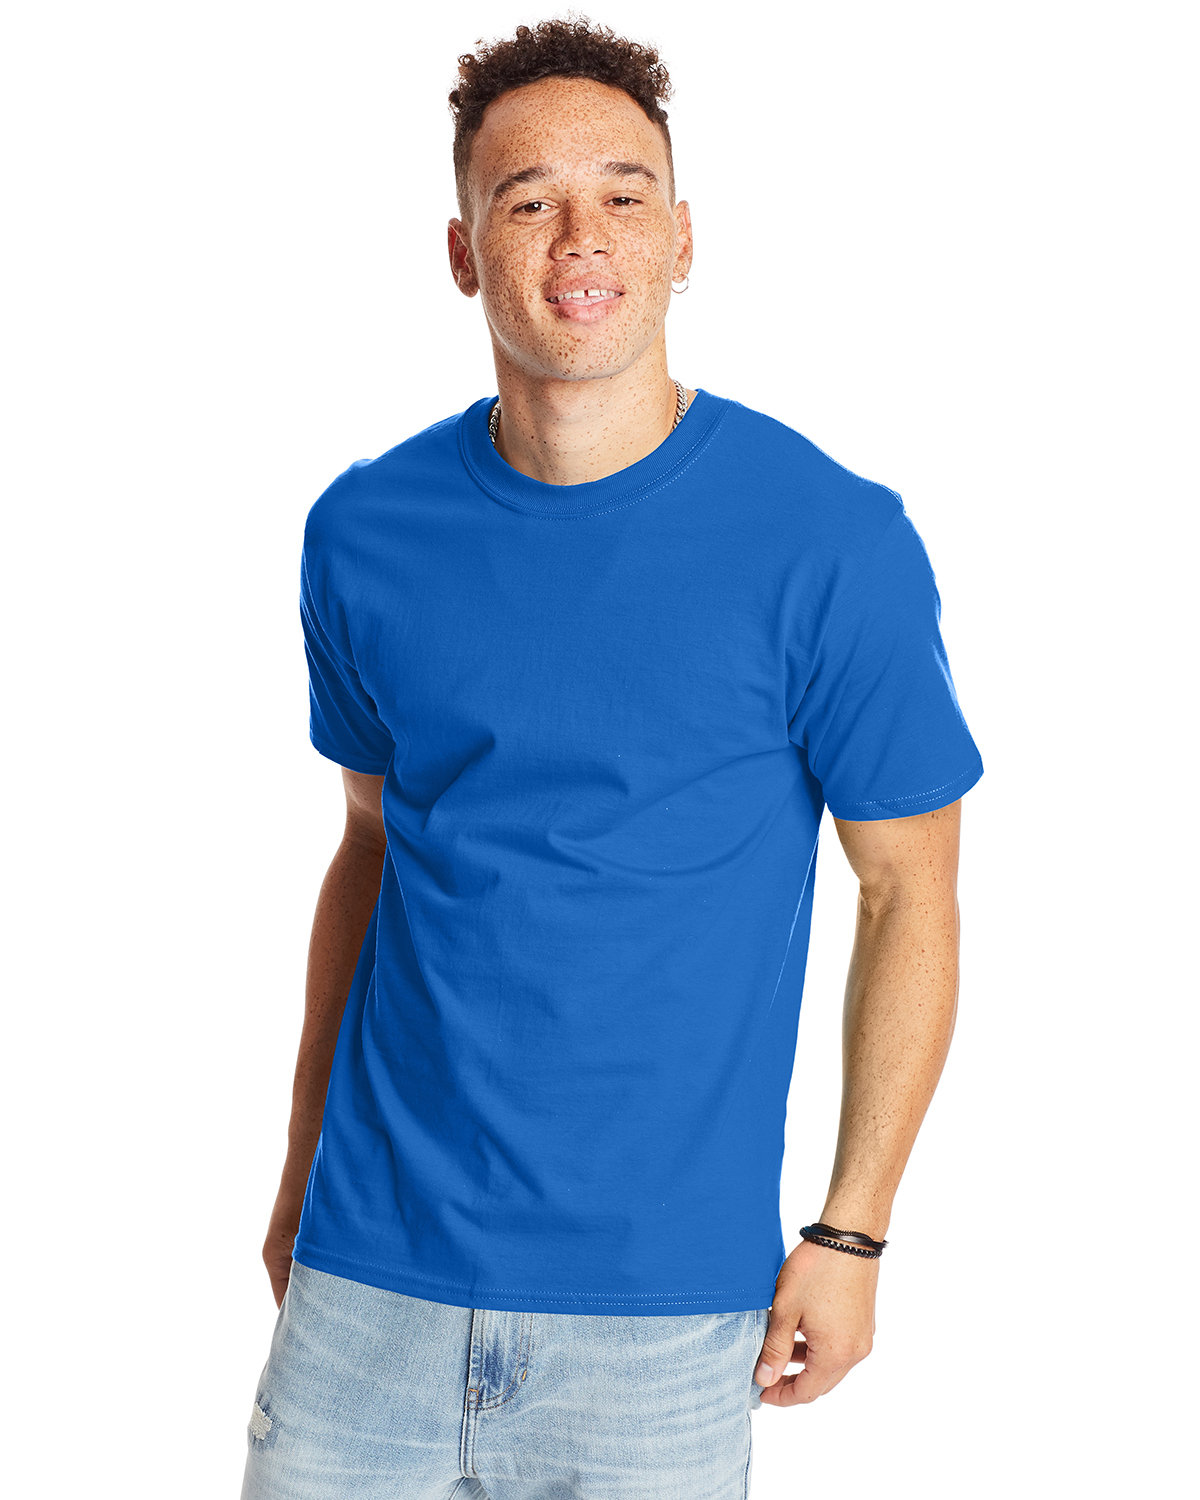 Buy Hanes Beefy-t 5180 Size Chart, Hanes 5180 T-shirt Size Guide, Hanes  5180 Black Mockup and Size Table Online in India 